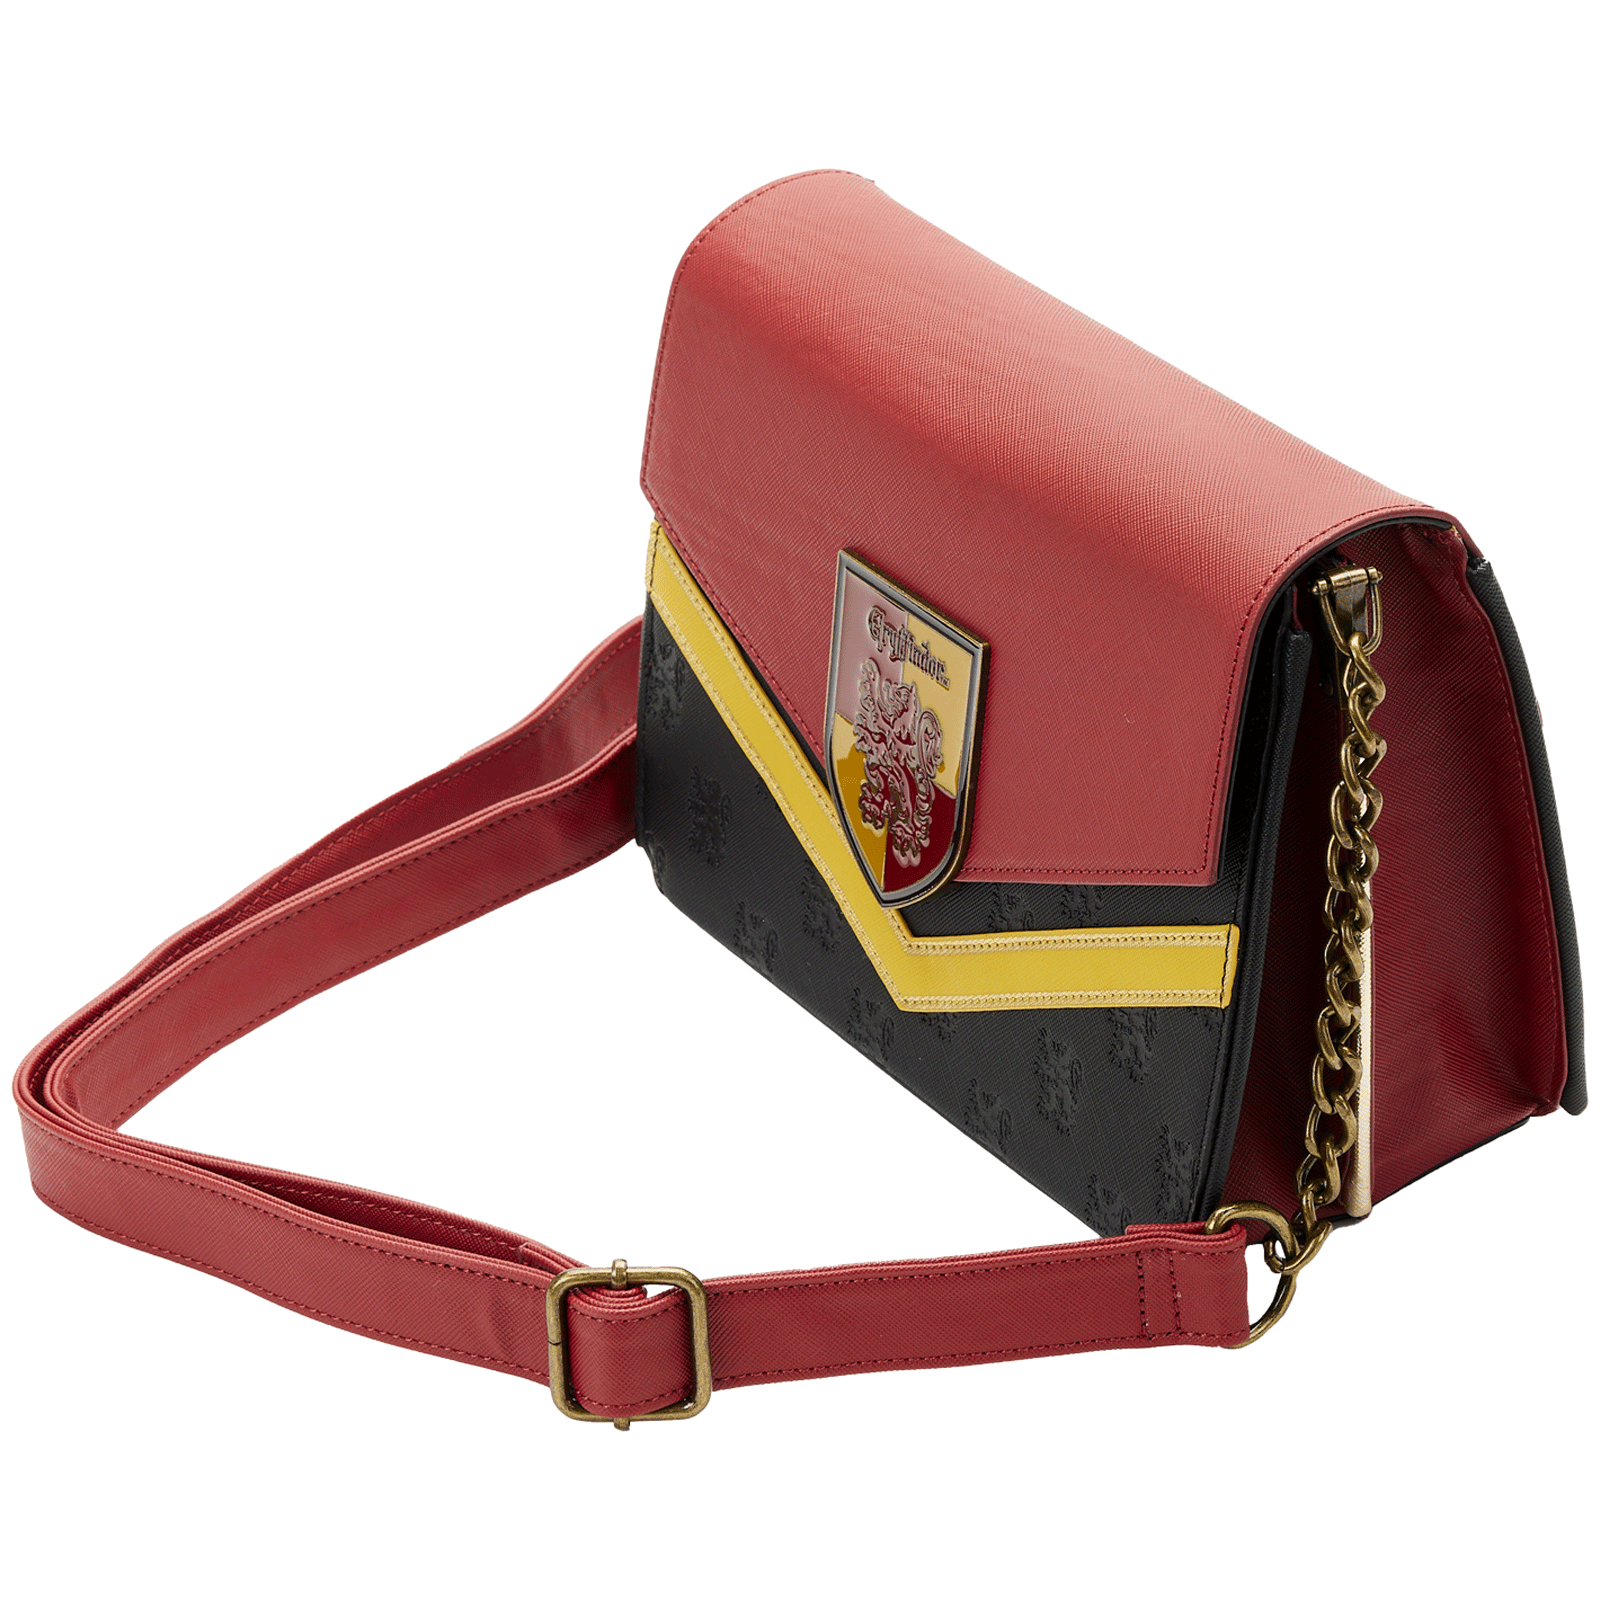 Loungefly x Harry Potter Gryffindor Chain Strap Crossbody Bag